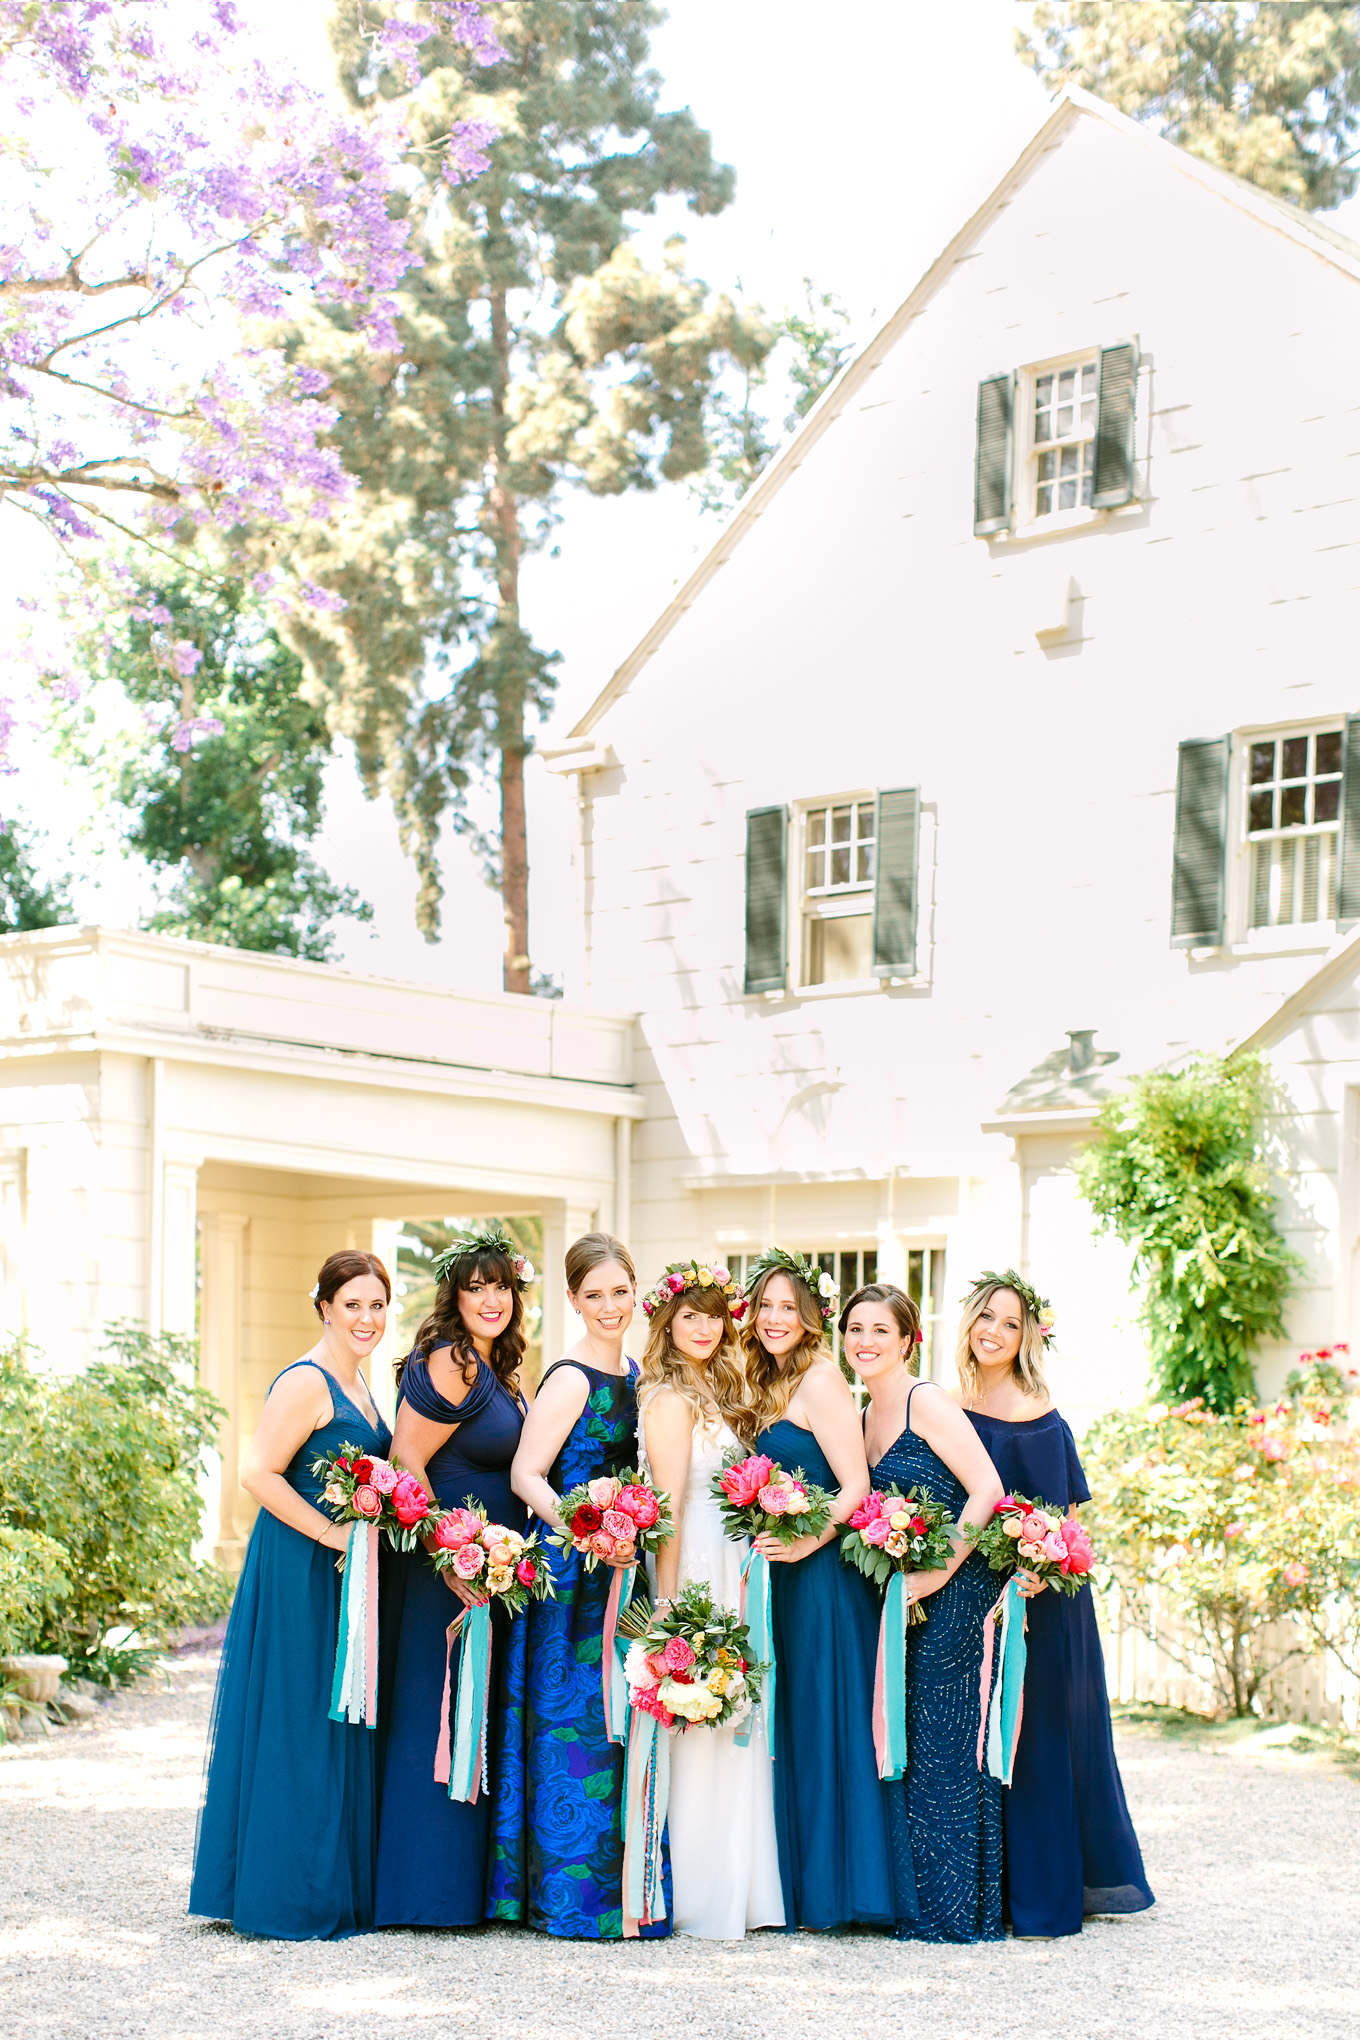 Bridesmaids in mismatched blue with colorful flowers at McCormick Home Ranch wedding | Best Southern California Garden Wedding Venues | Colorful and elevated wedding photography for fun-loving couples | #gardenvenue #weddingvenue #socalweddingvenue #bouquetideas #uniquebouquet   Source: Mary Costa Photography | Los Angeles 